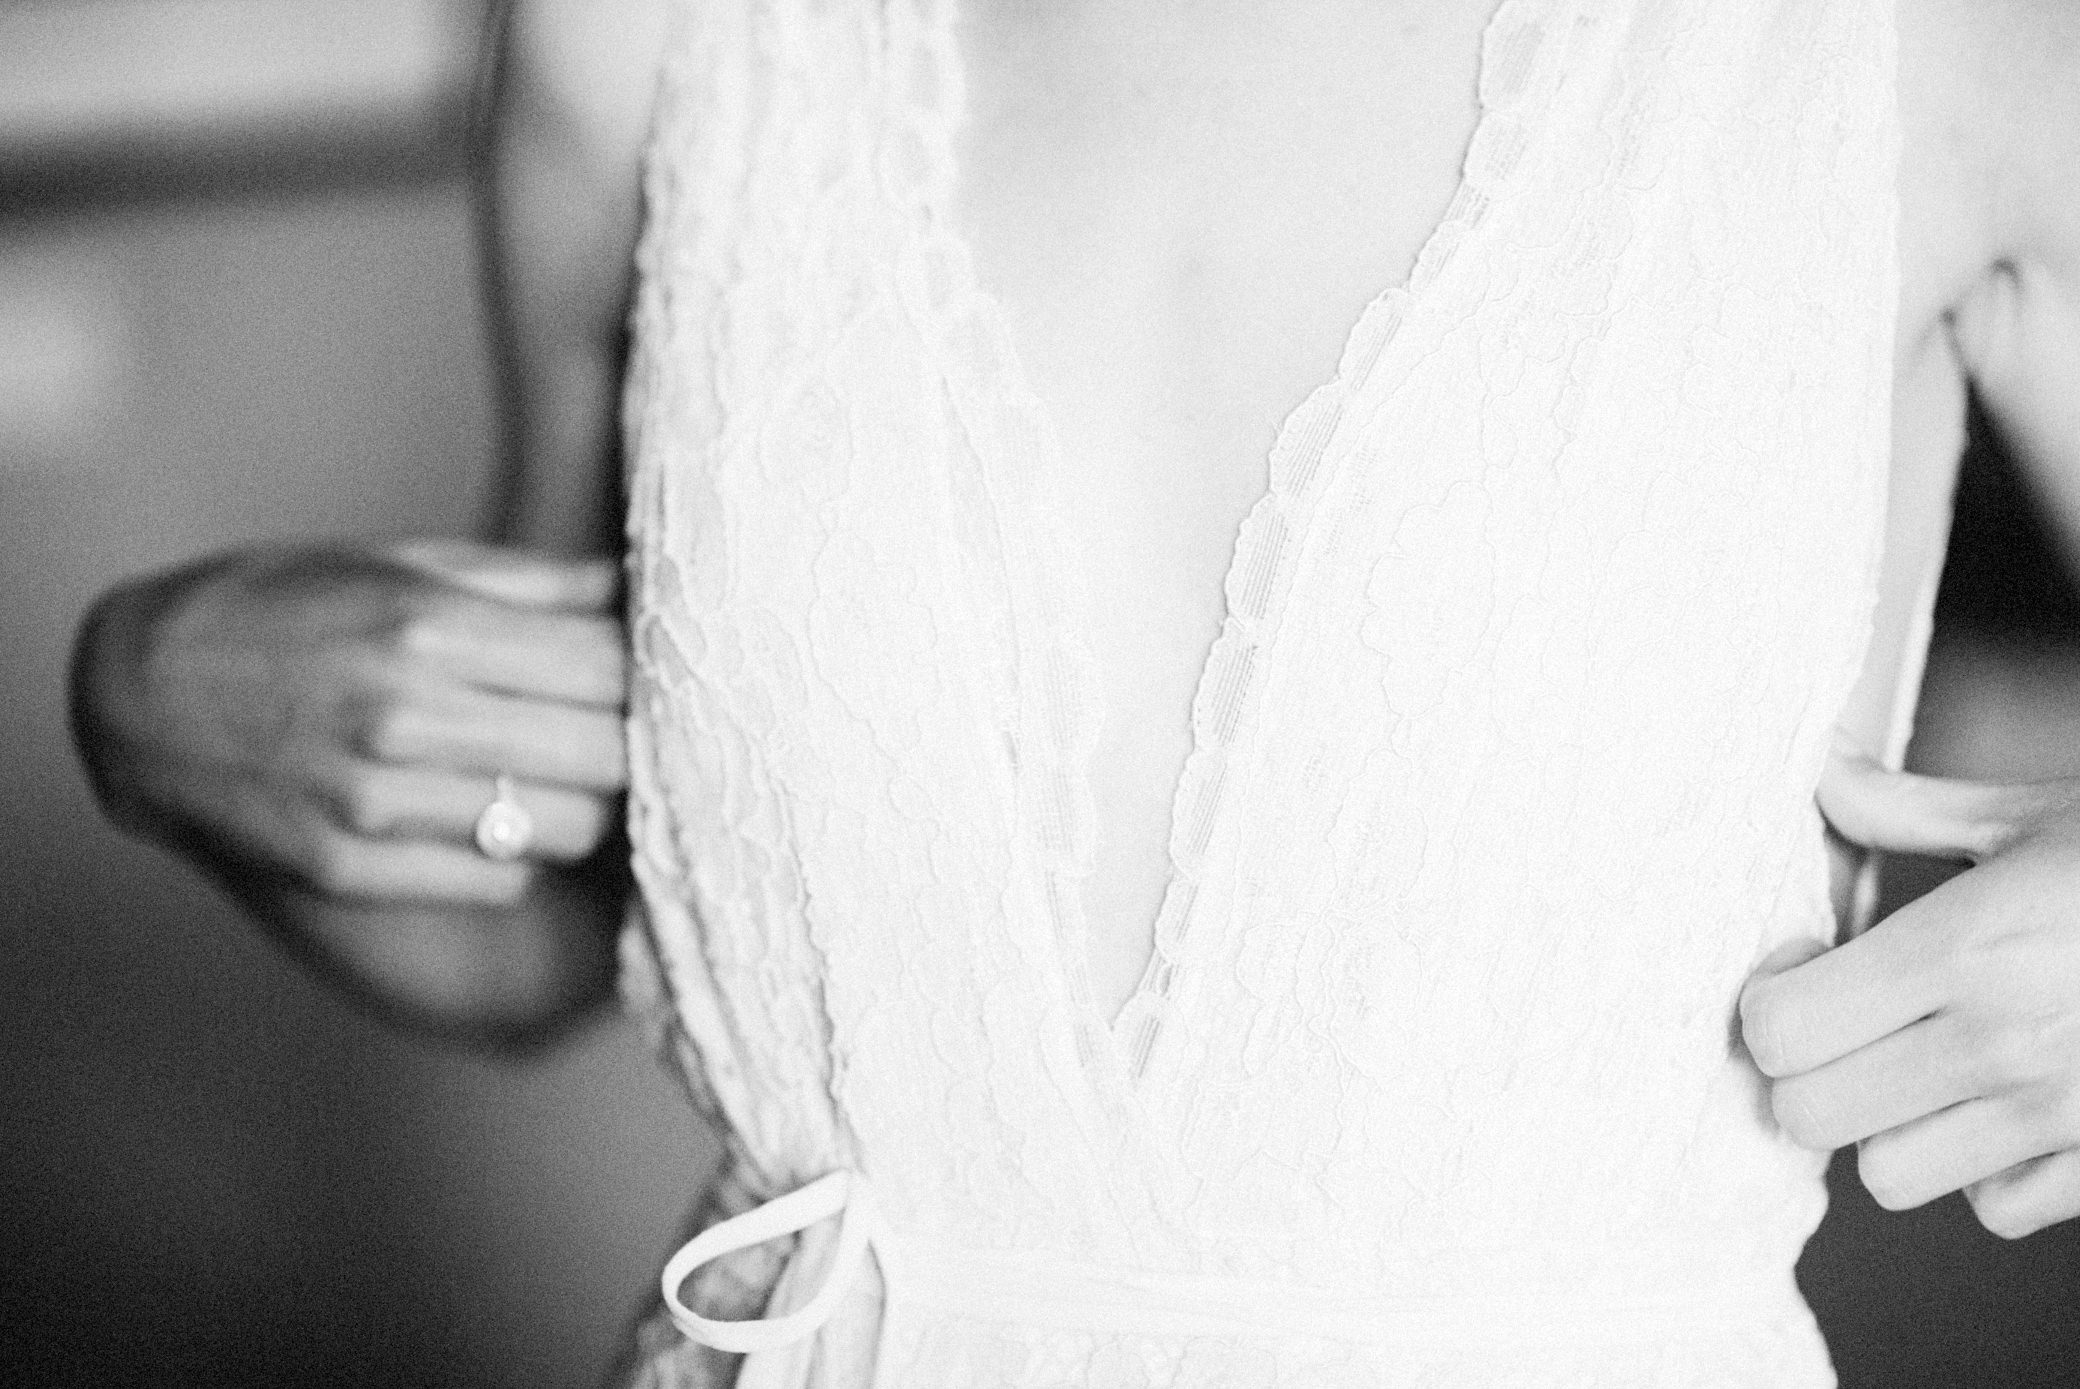 Zoe gets her wedding gown on at Willows Lodge, Washington, Summer 2016